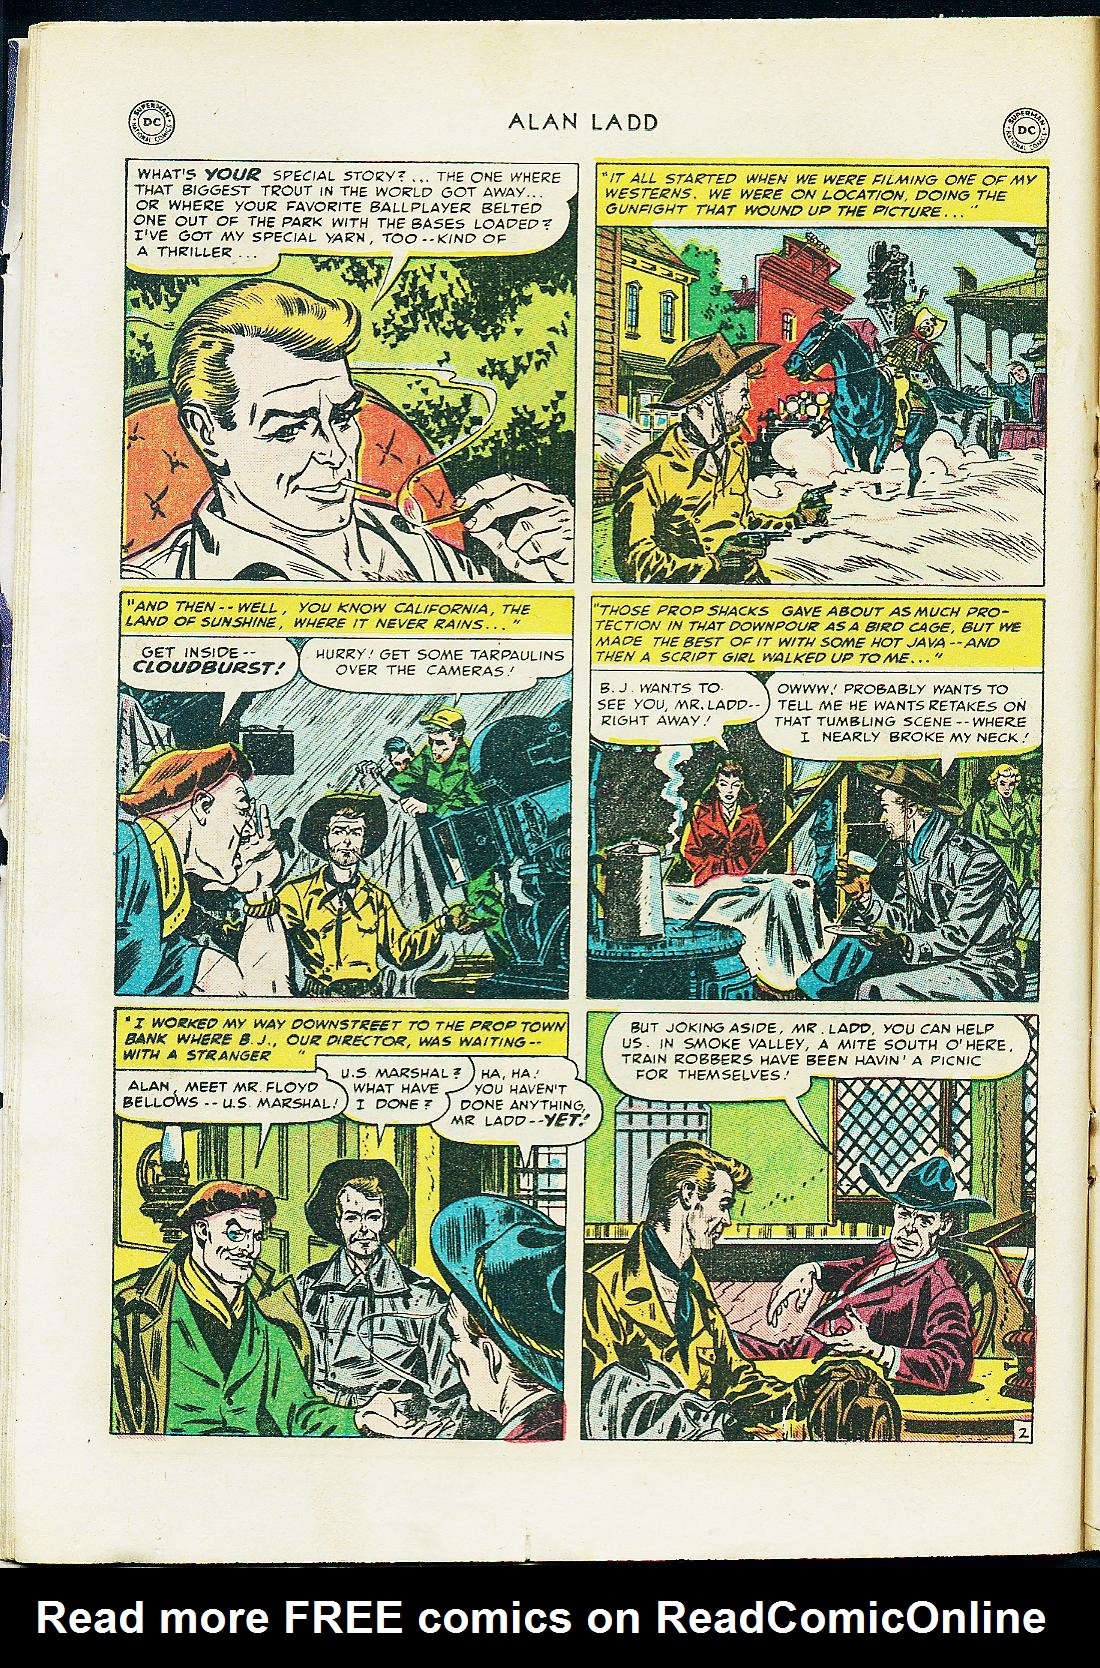 Read online Adventures of Alan Ladd comic -  Issue #1 - 18